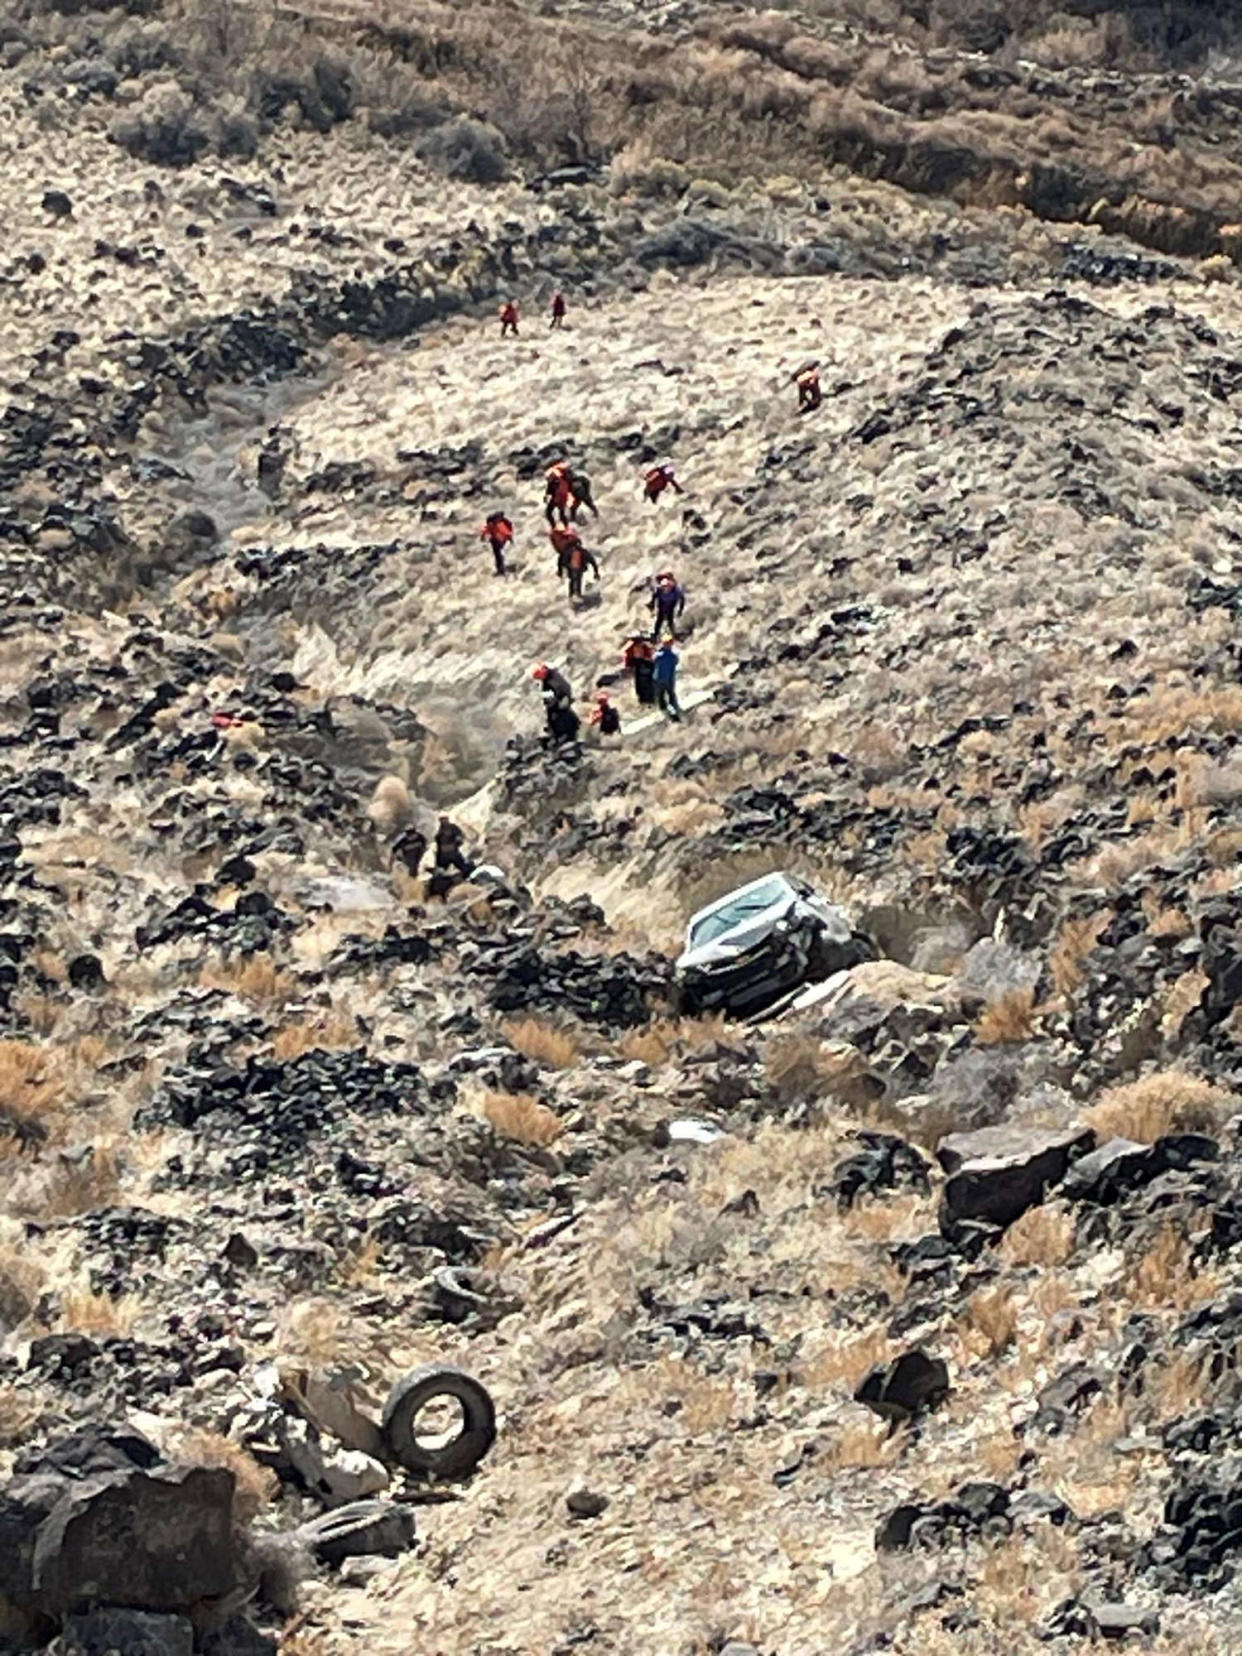 Search teams rescued 72-year-old Penny Kay Clark and carried her on foot to a nearby ambulance for an evaluation Saturday. Medics believe she had been out in the wild for several days. (Canyon County Sheriff's Office)